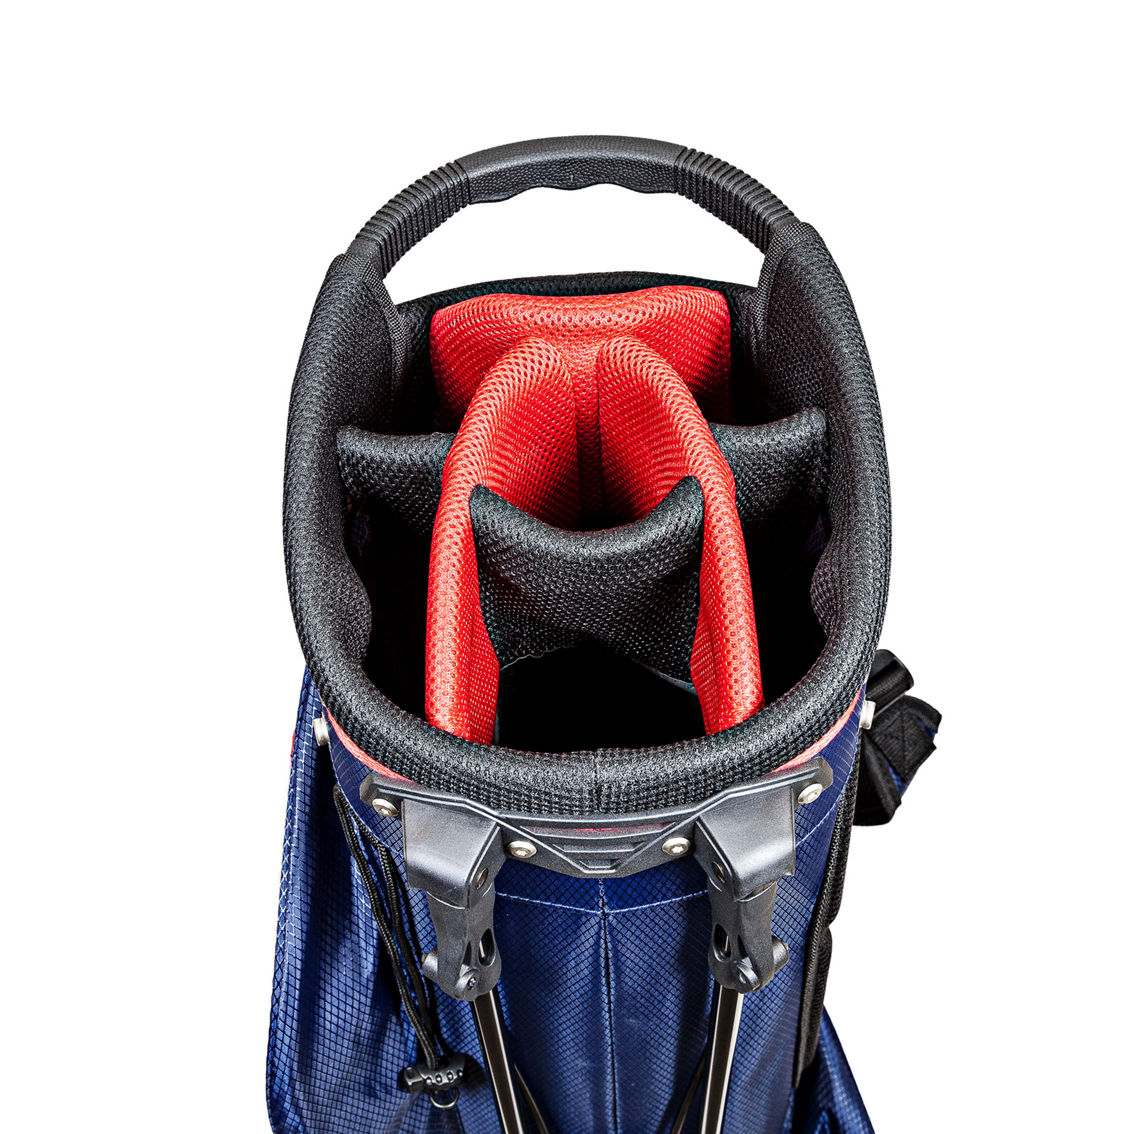 GOLF GIFTS & GALLERY CARRY STAND BAG RED/WHT/BLUE - Image 5 of 5